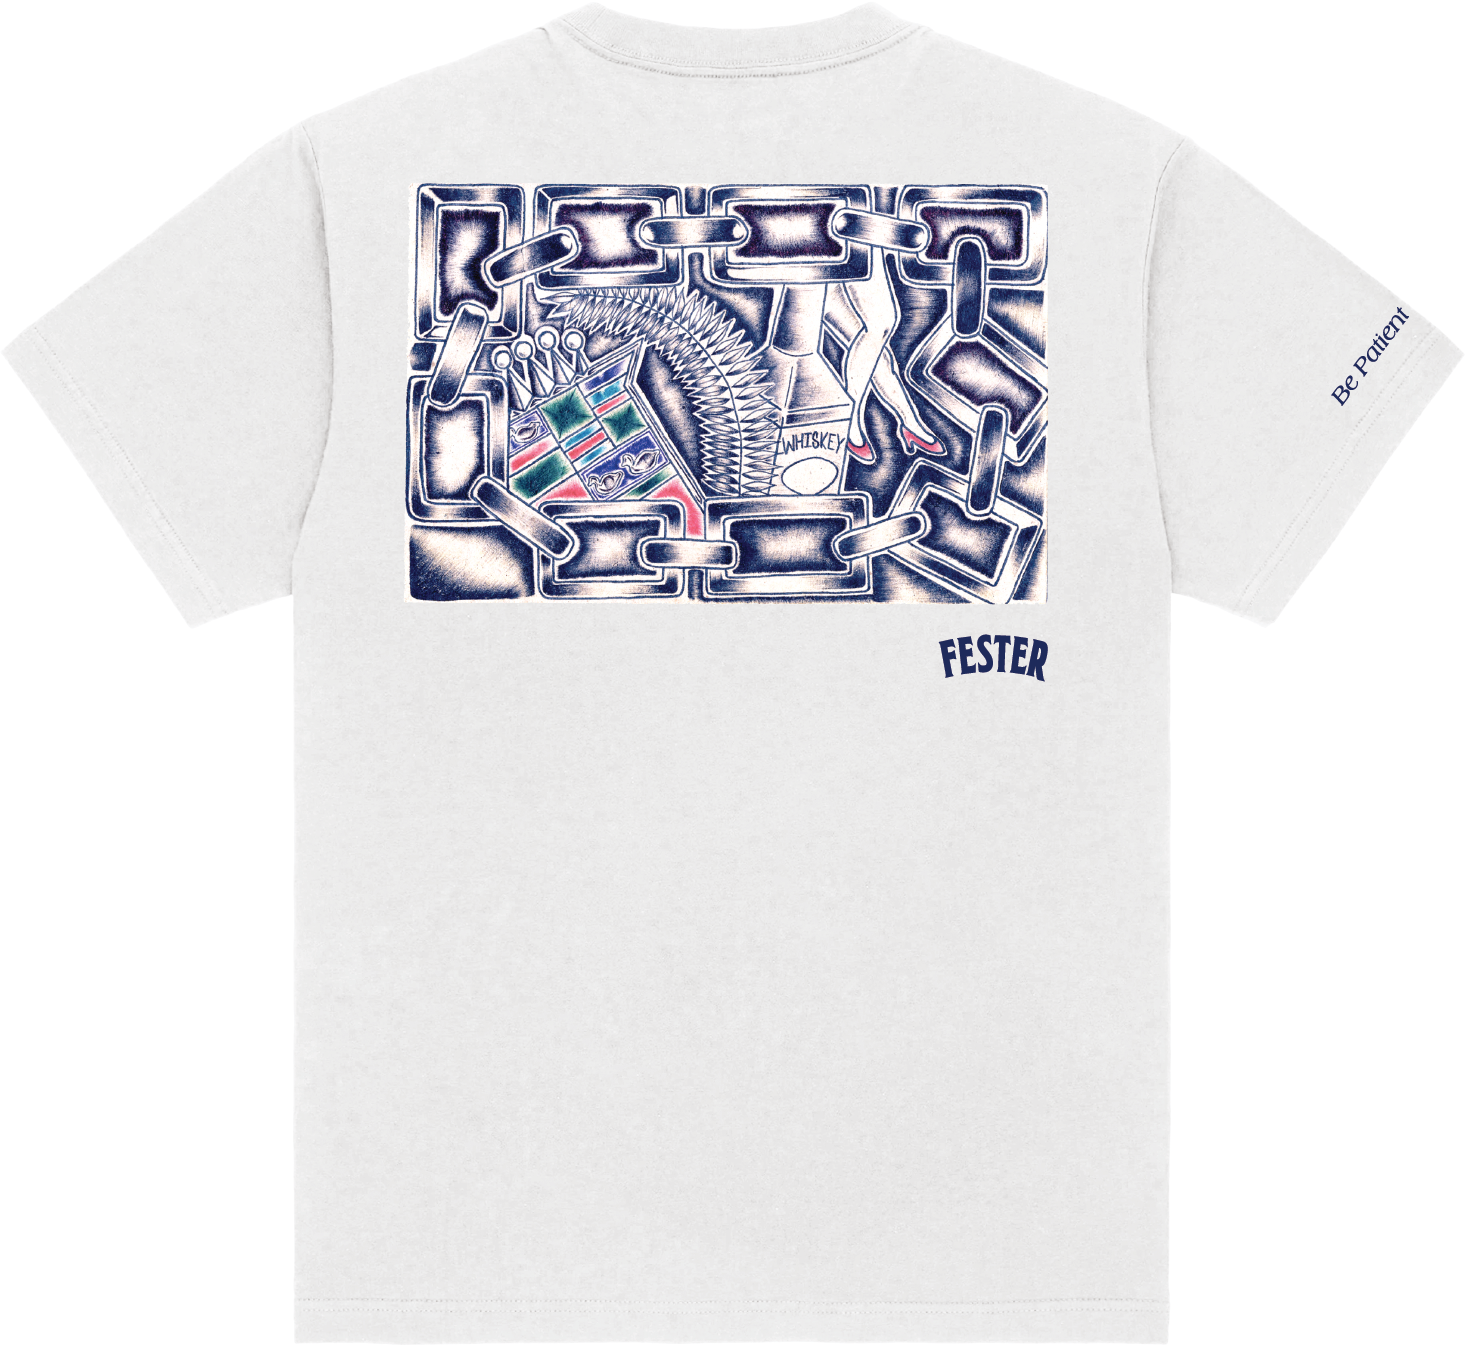 Be Patient Grow Daily x Fester - Great Lakes Influence White Tee